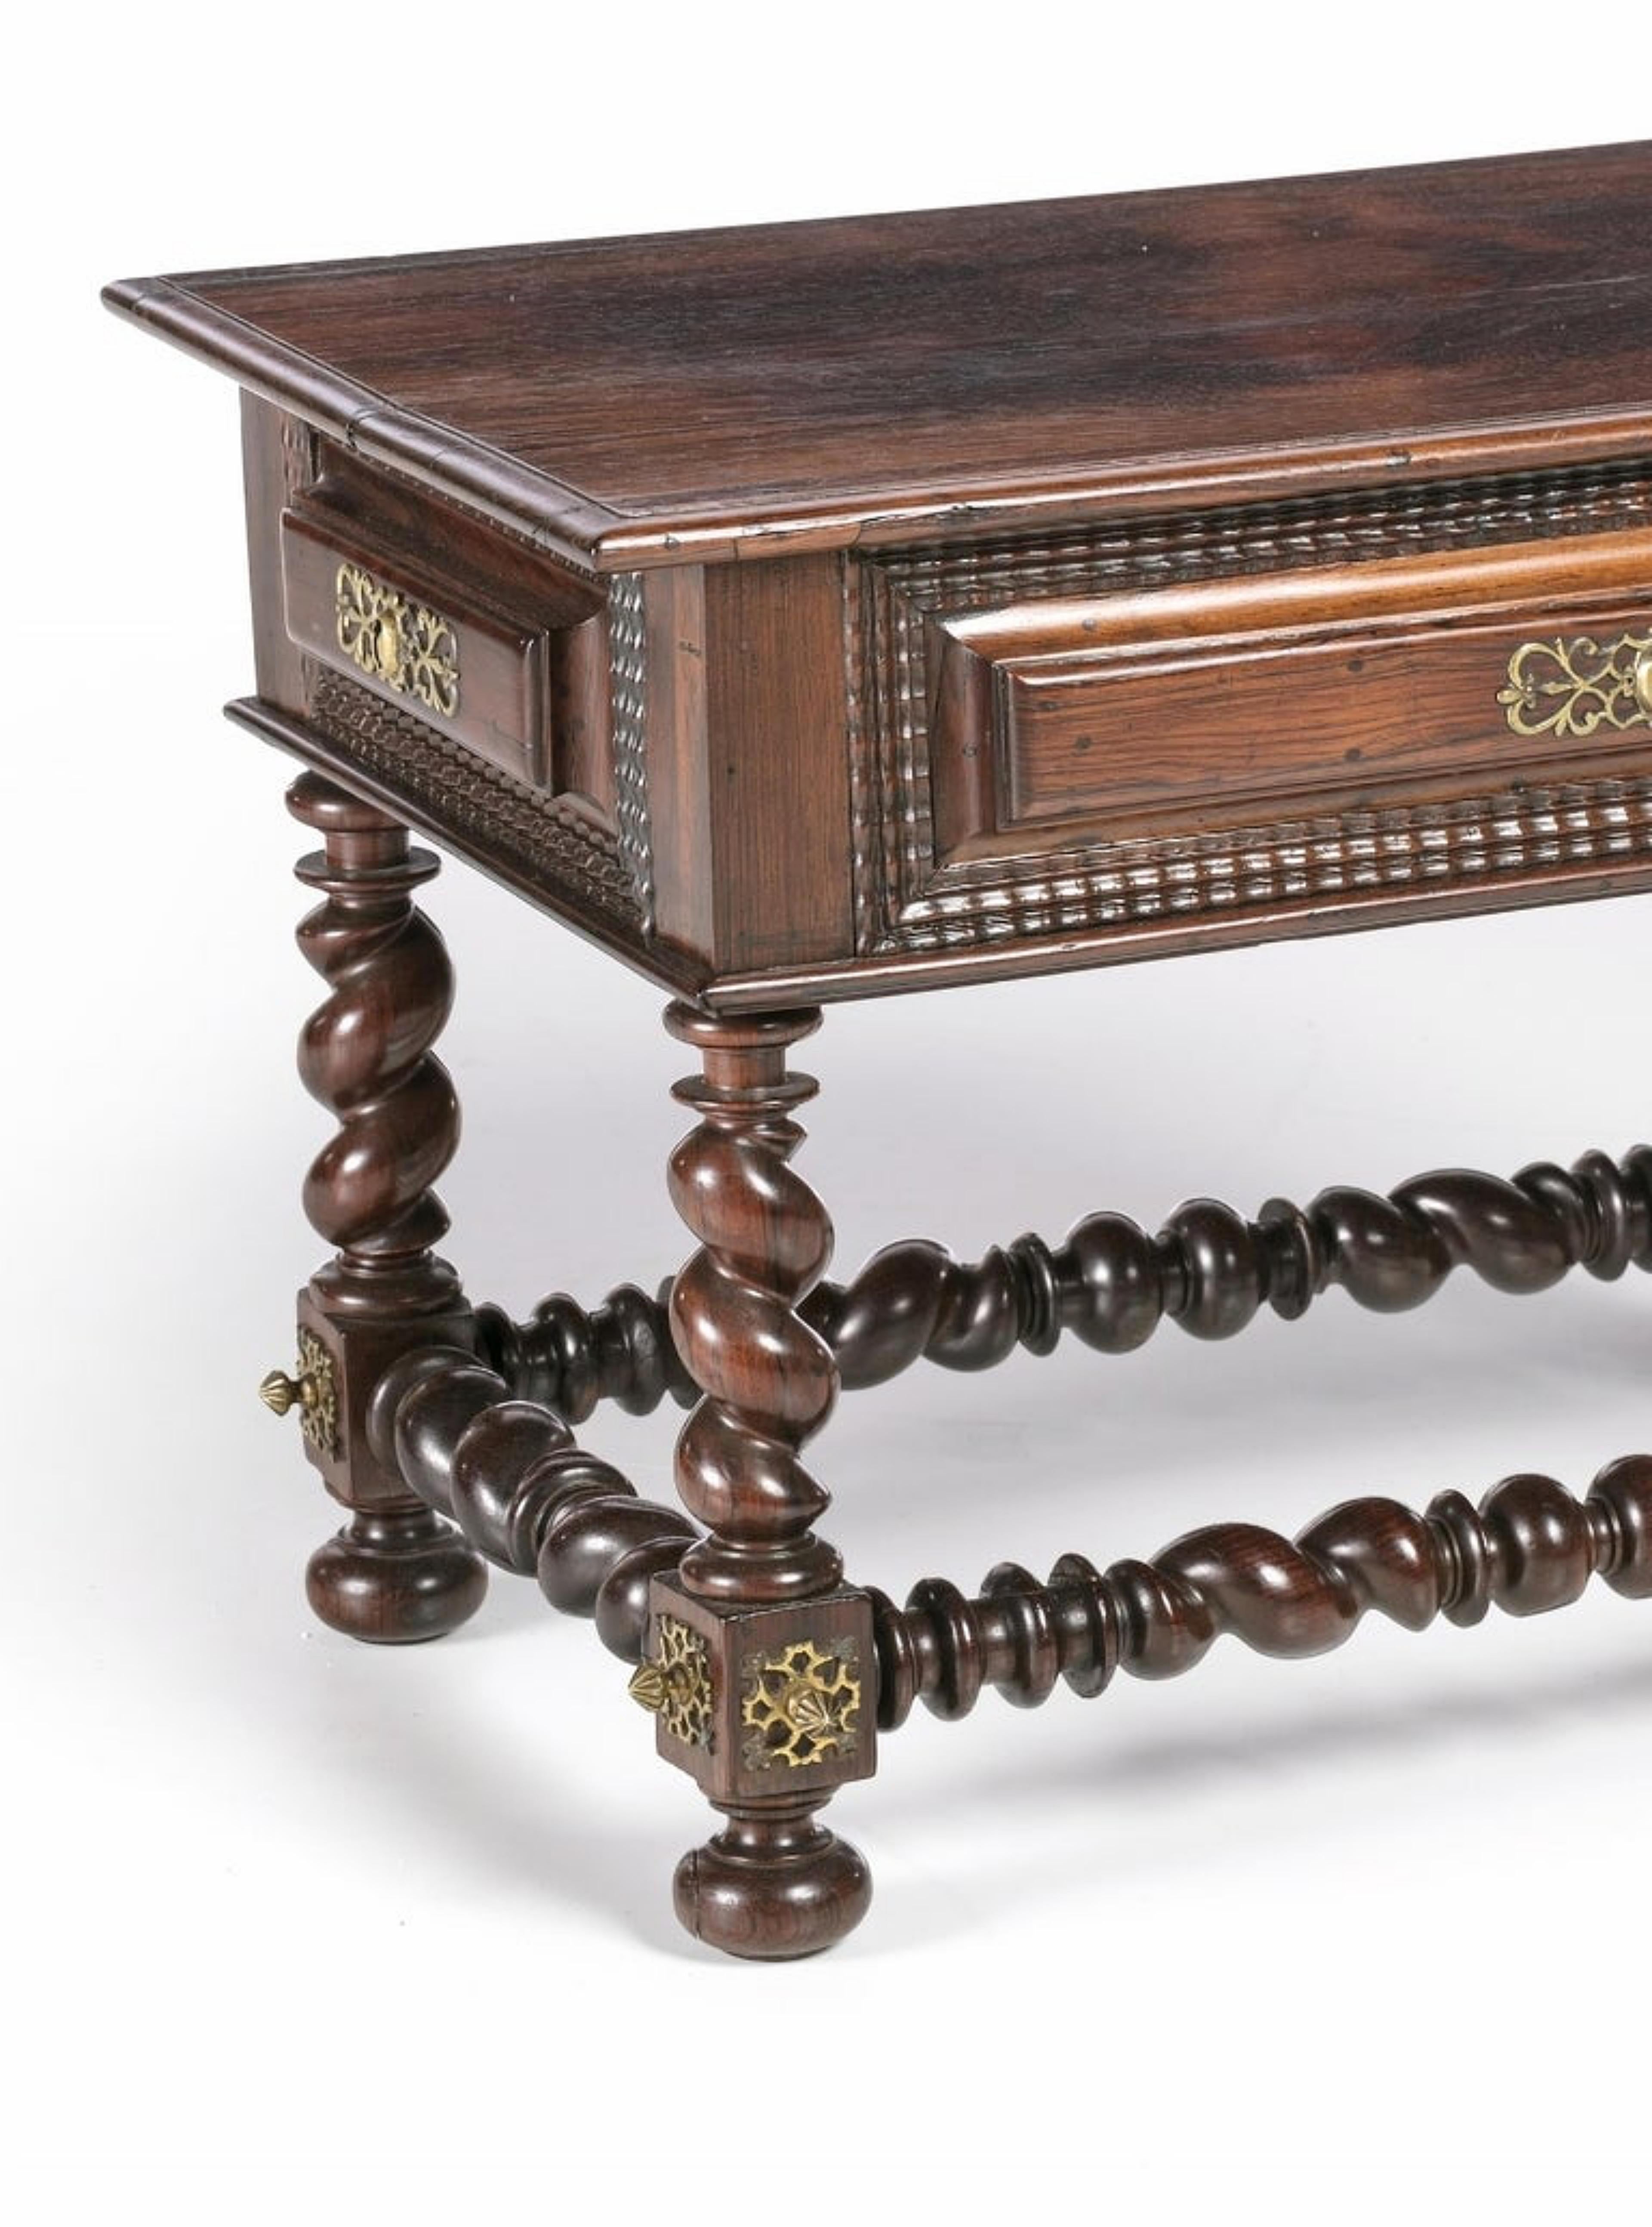 18th century Portuguese,
in Brazilian rosewood, turned legs and beams. gilt copper hardware and applications. 
With one drawer simulating two. Small defects. 
Dimension: 47 x 68 x 43 cm.
very good condition.